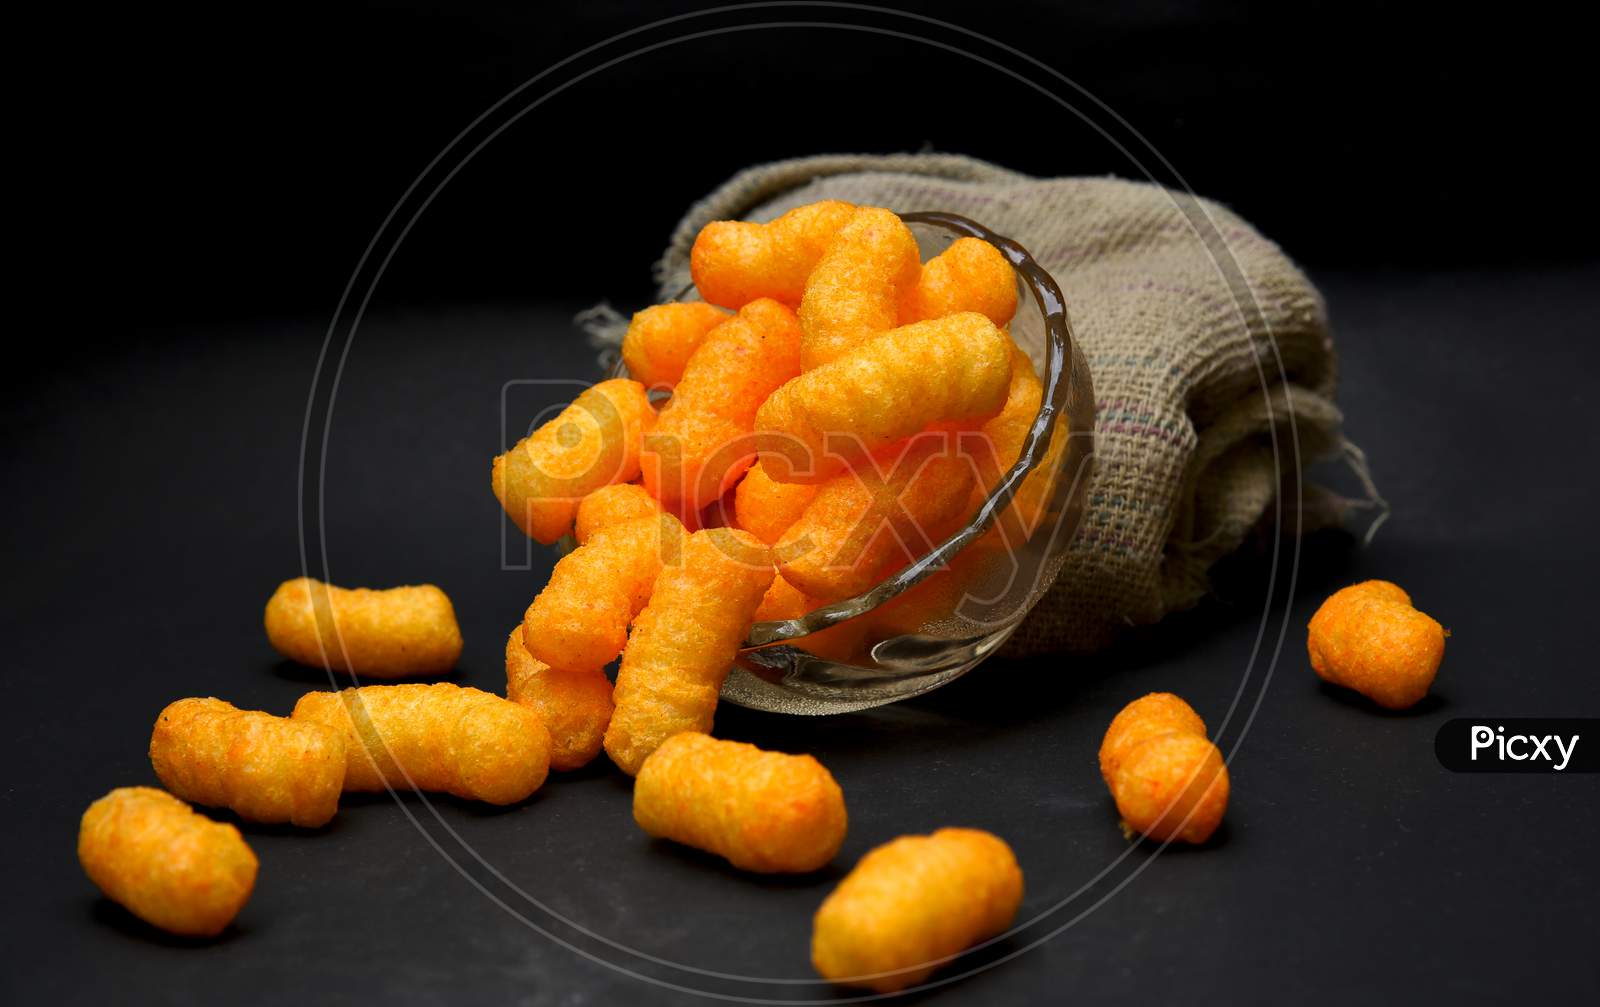 Snacks, crochets or cheese puff pastry on dark background.Different kinds of popcorn in bowl